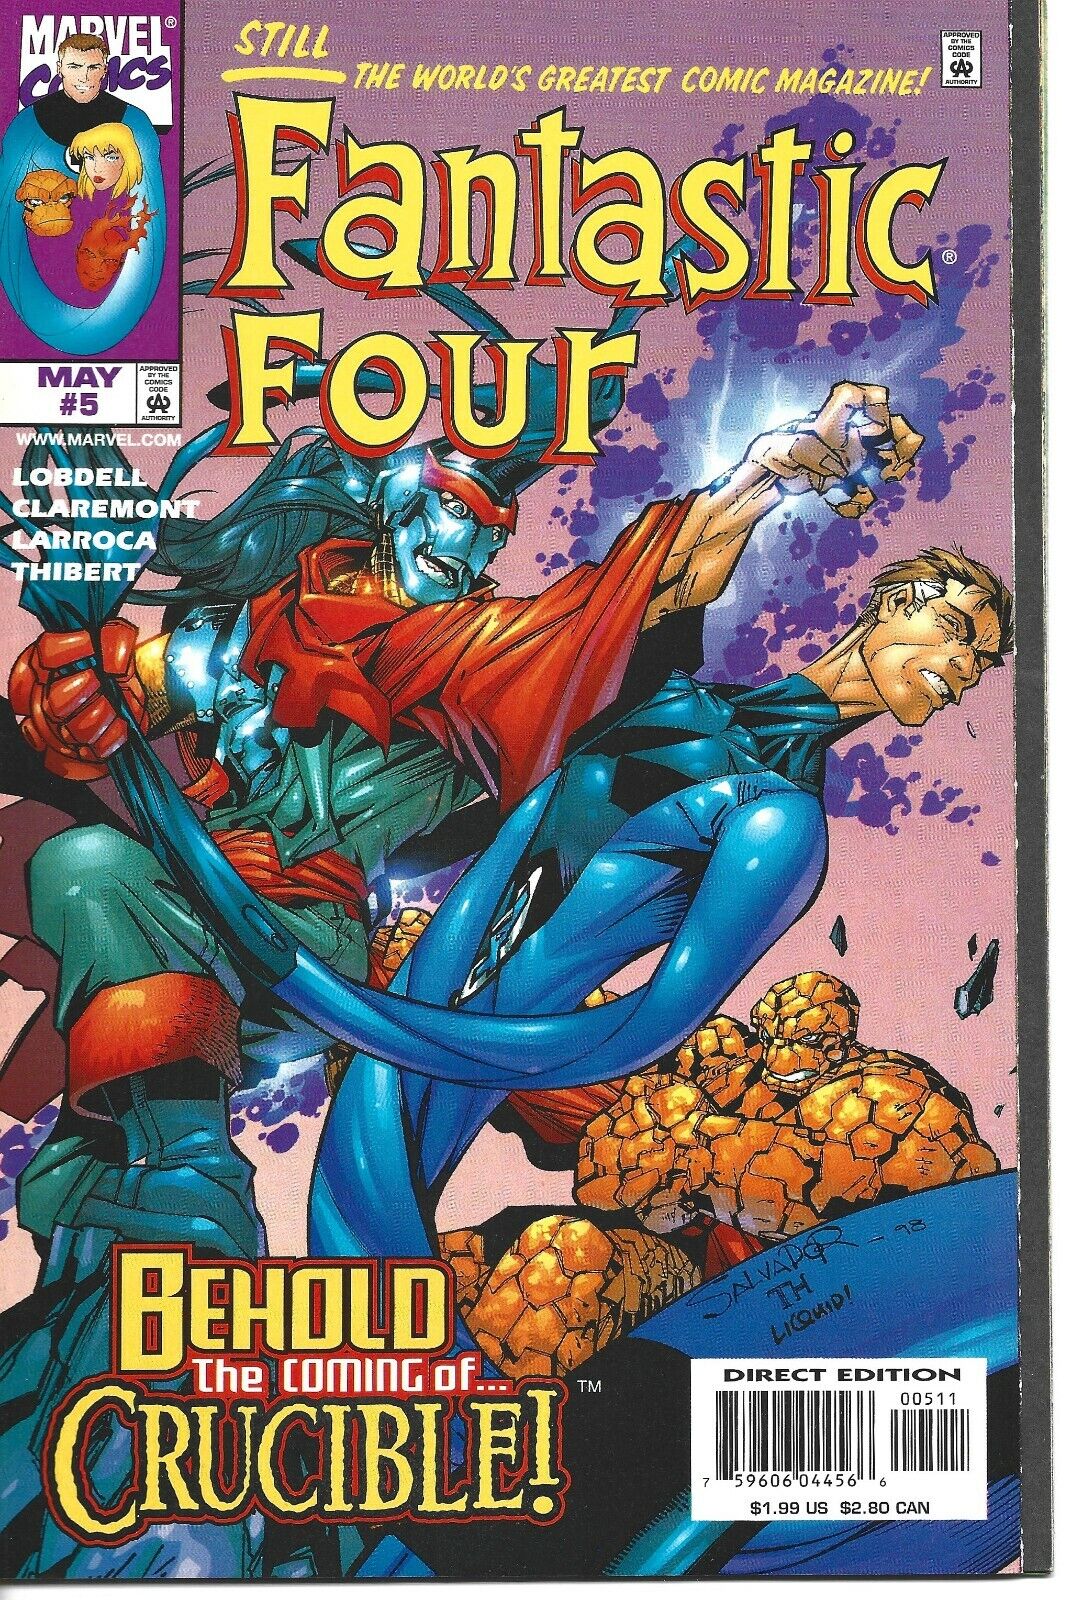 FANTASTIC FOUR #5 MARVEL COMICS 1998 BAGGED AND BOARDED